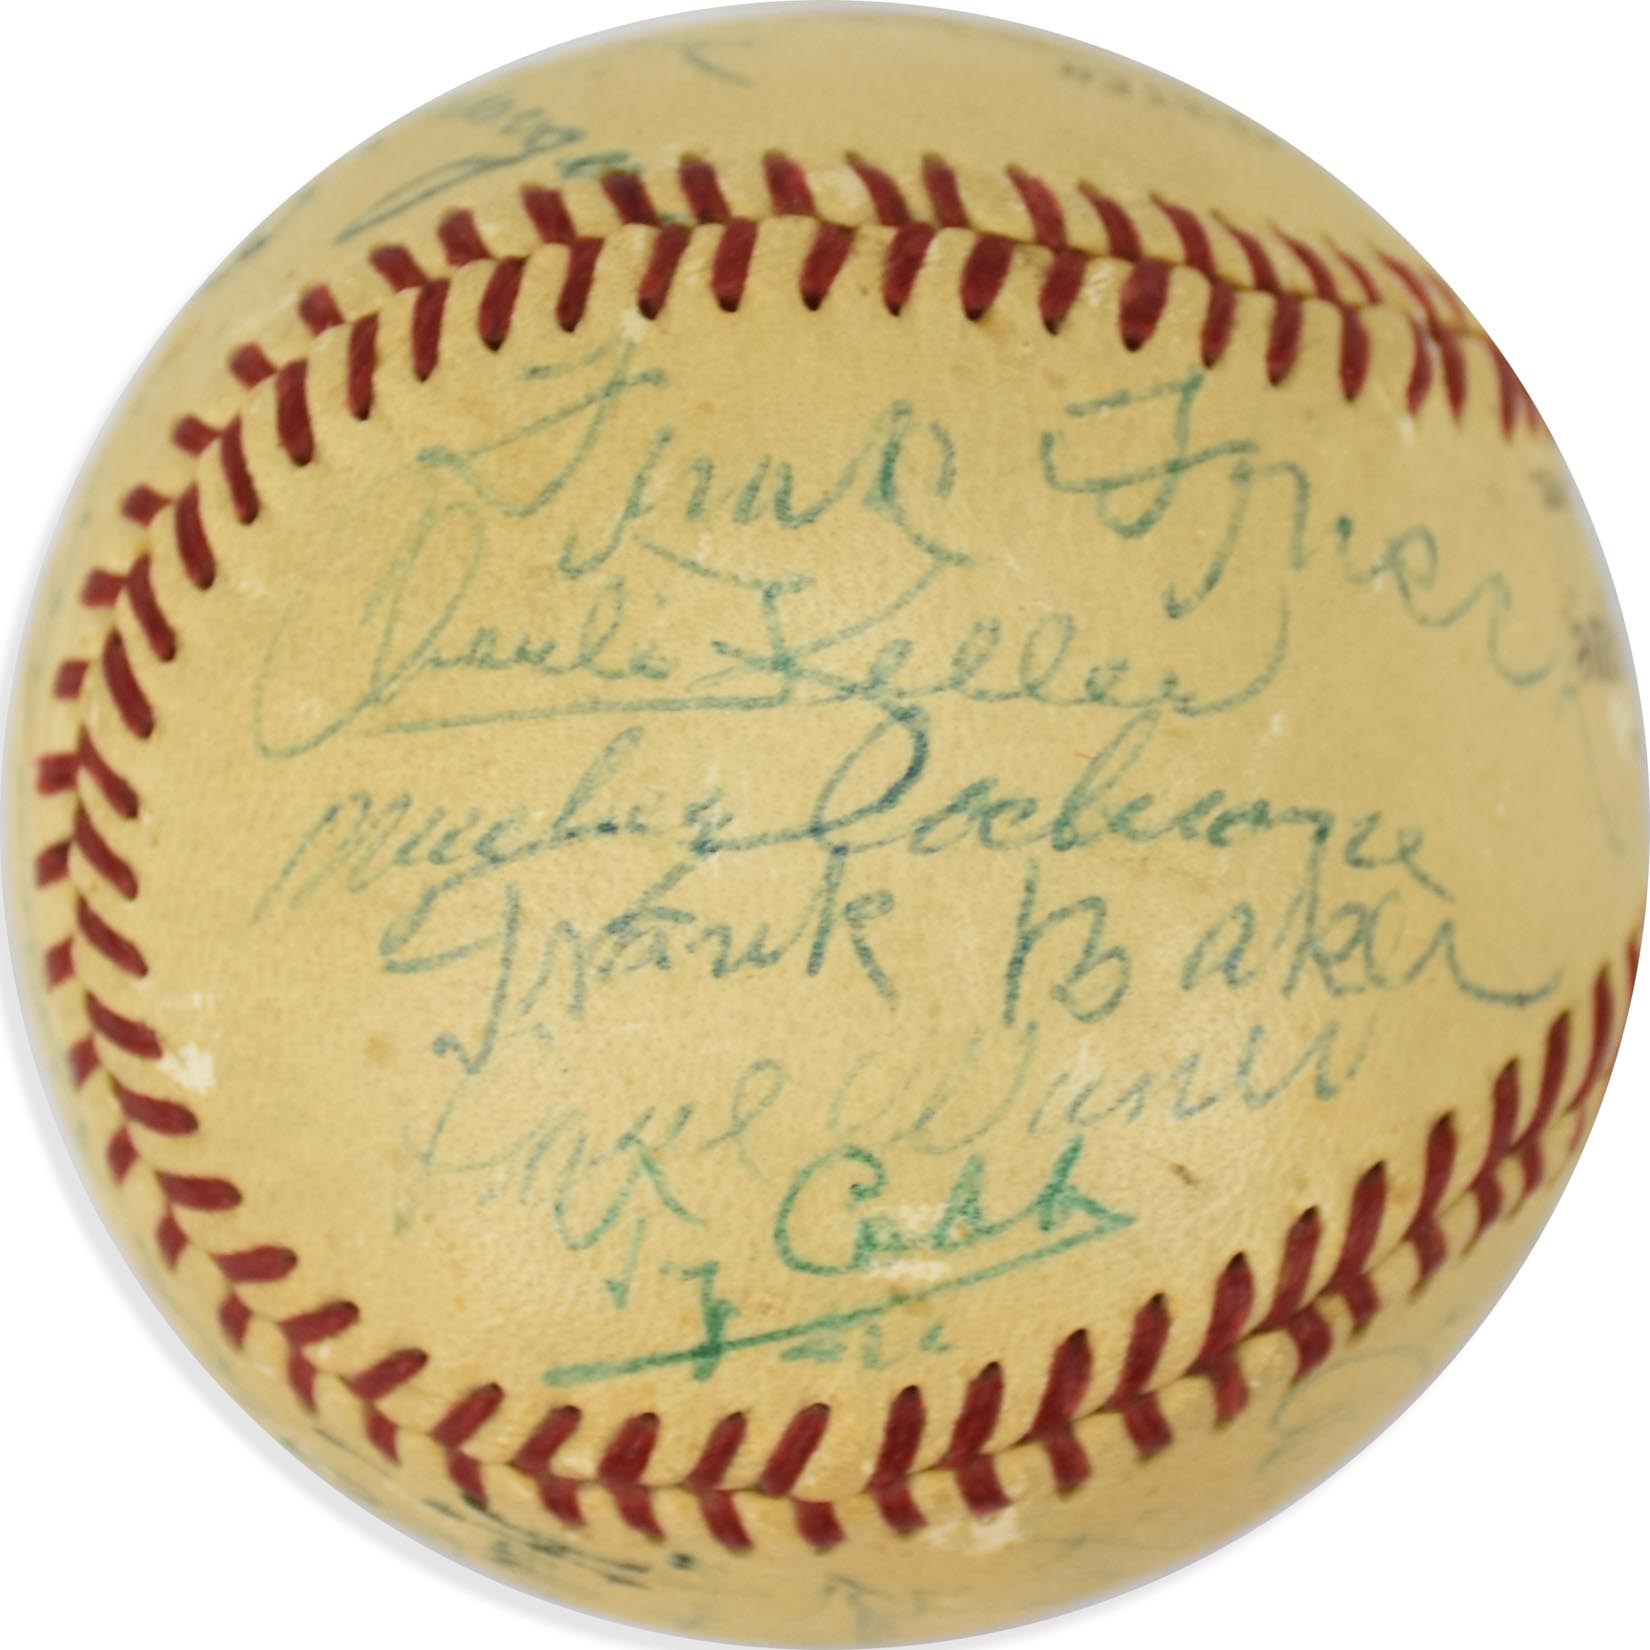 Baseball Autographs - 1955 Hall of Fame Induction Weekend Signed Baseball with Ty Cobb